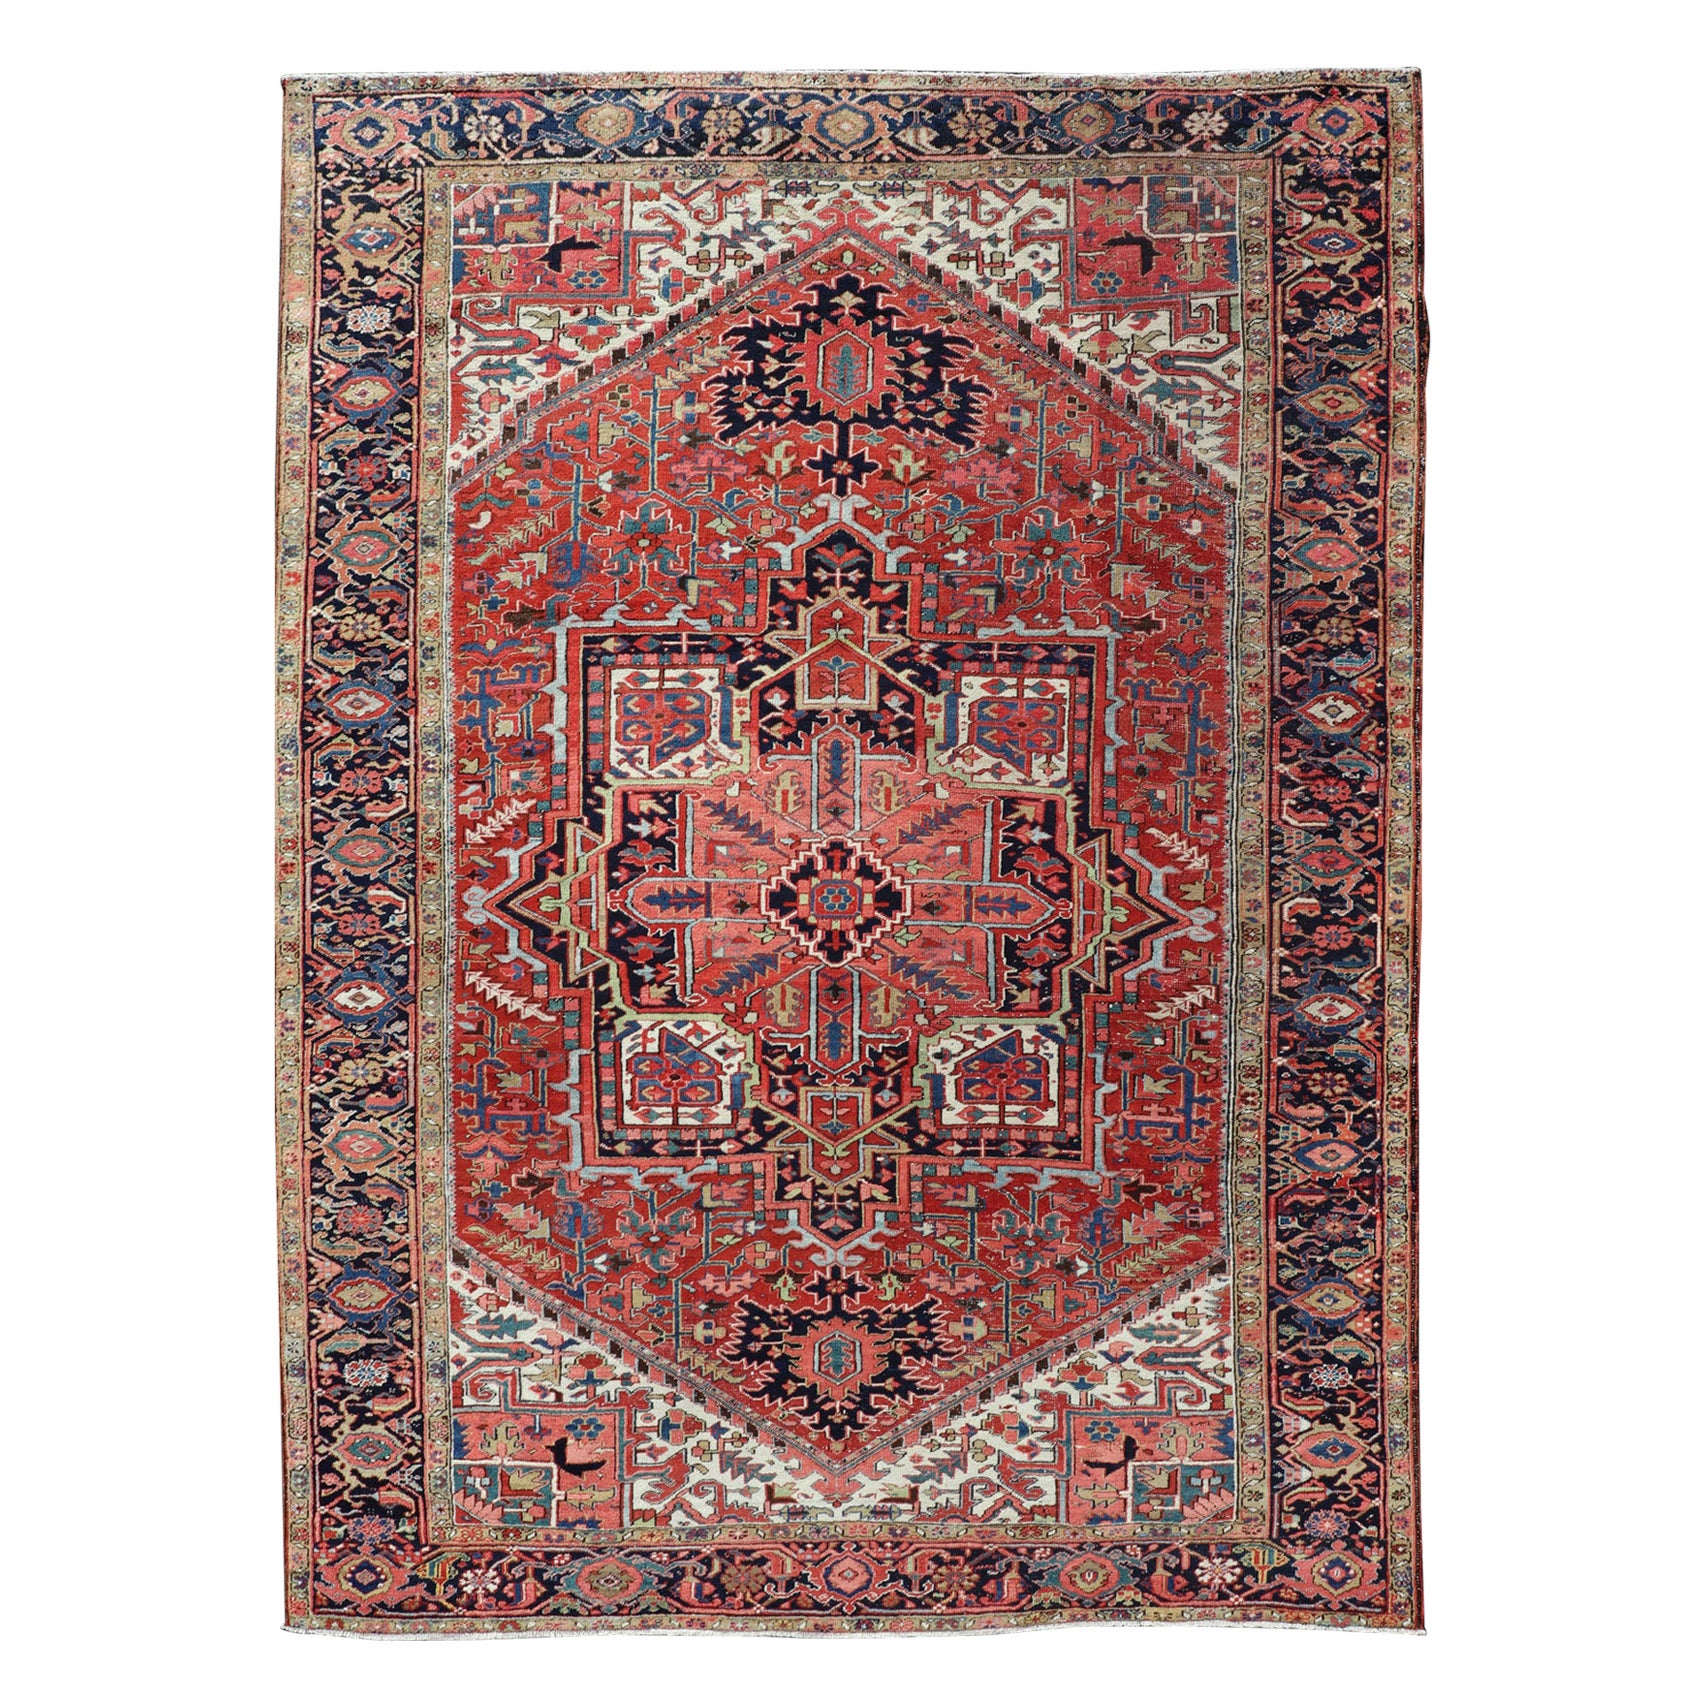 Antique Persian Heriz with Central Medallion Design in Red and Jewel Tones 